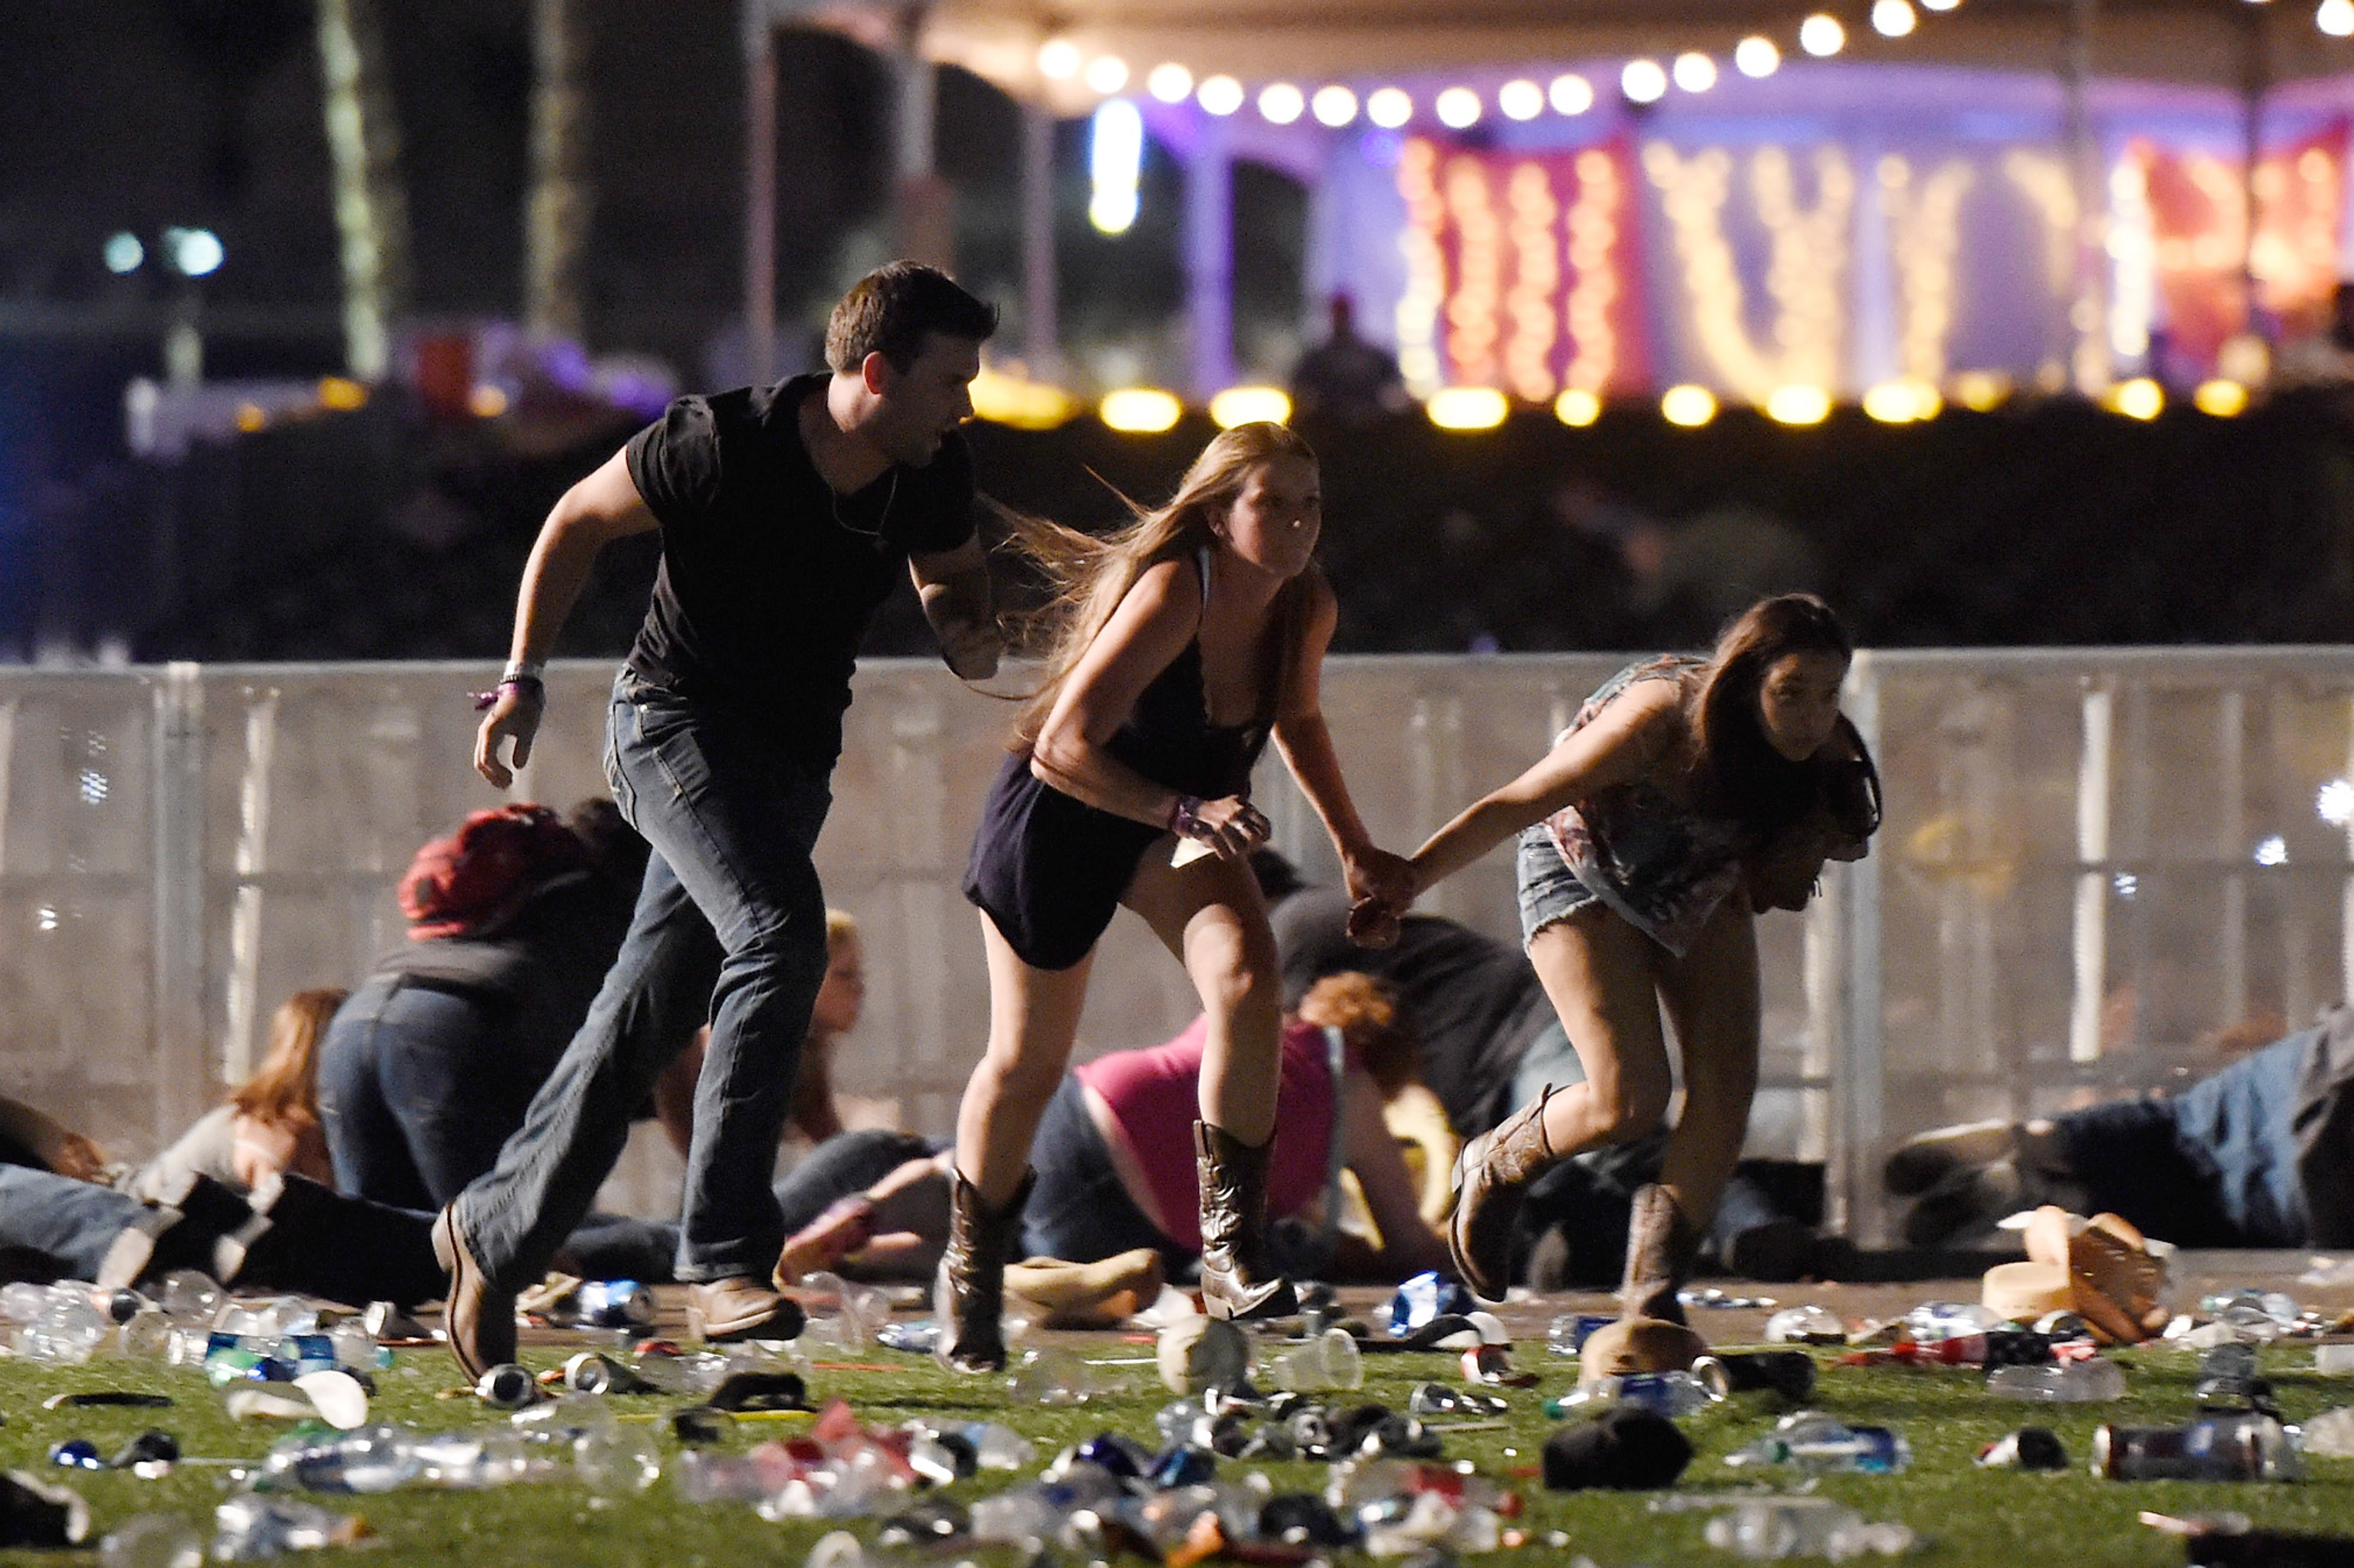 People run from the Route 91 Harvest country music festival after apparent gun fire was hear on October 1, 2017 in Las Vegas, Nevada. A gunman has opened fire on a music festival in Las Vegas, leaving at least 20 people dead and more than 100 injured. Police have confirmed that one suspect has been shot. The investigation is ongoing. (Photograph by David Becker—Getty)